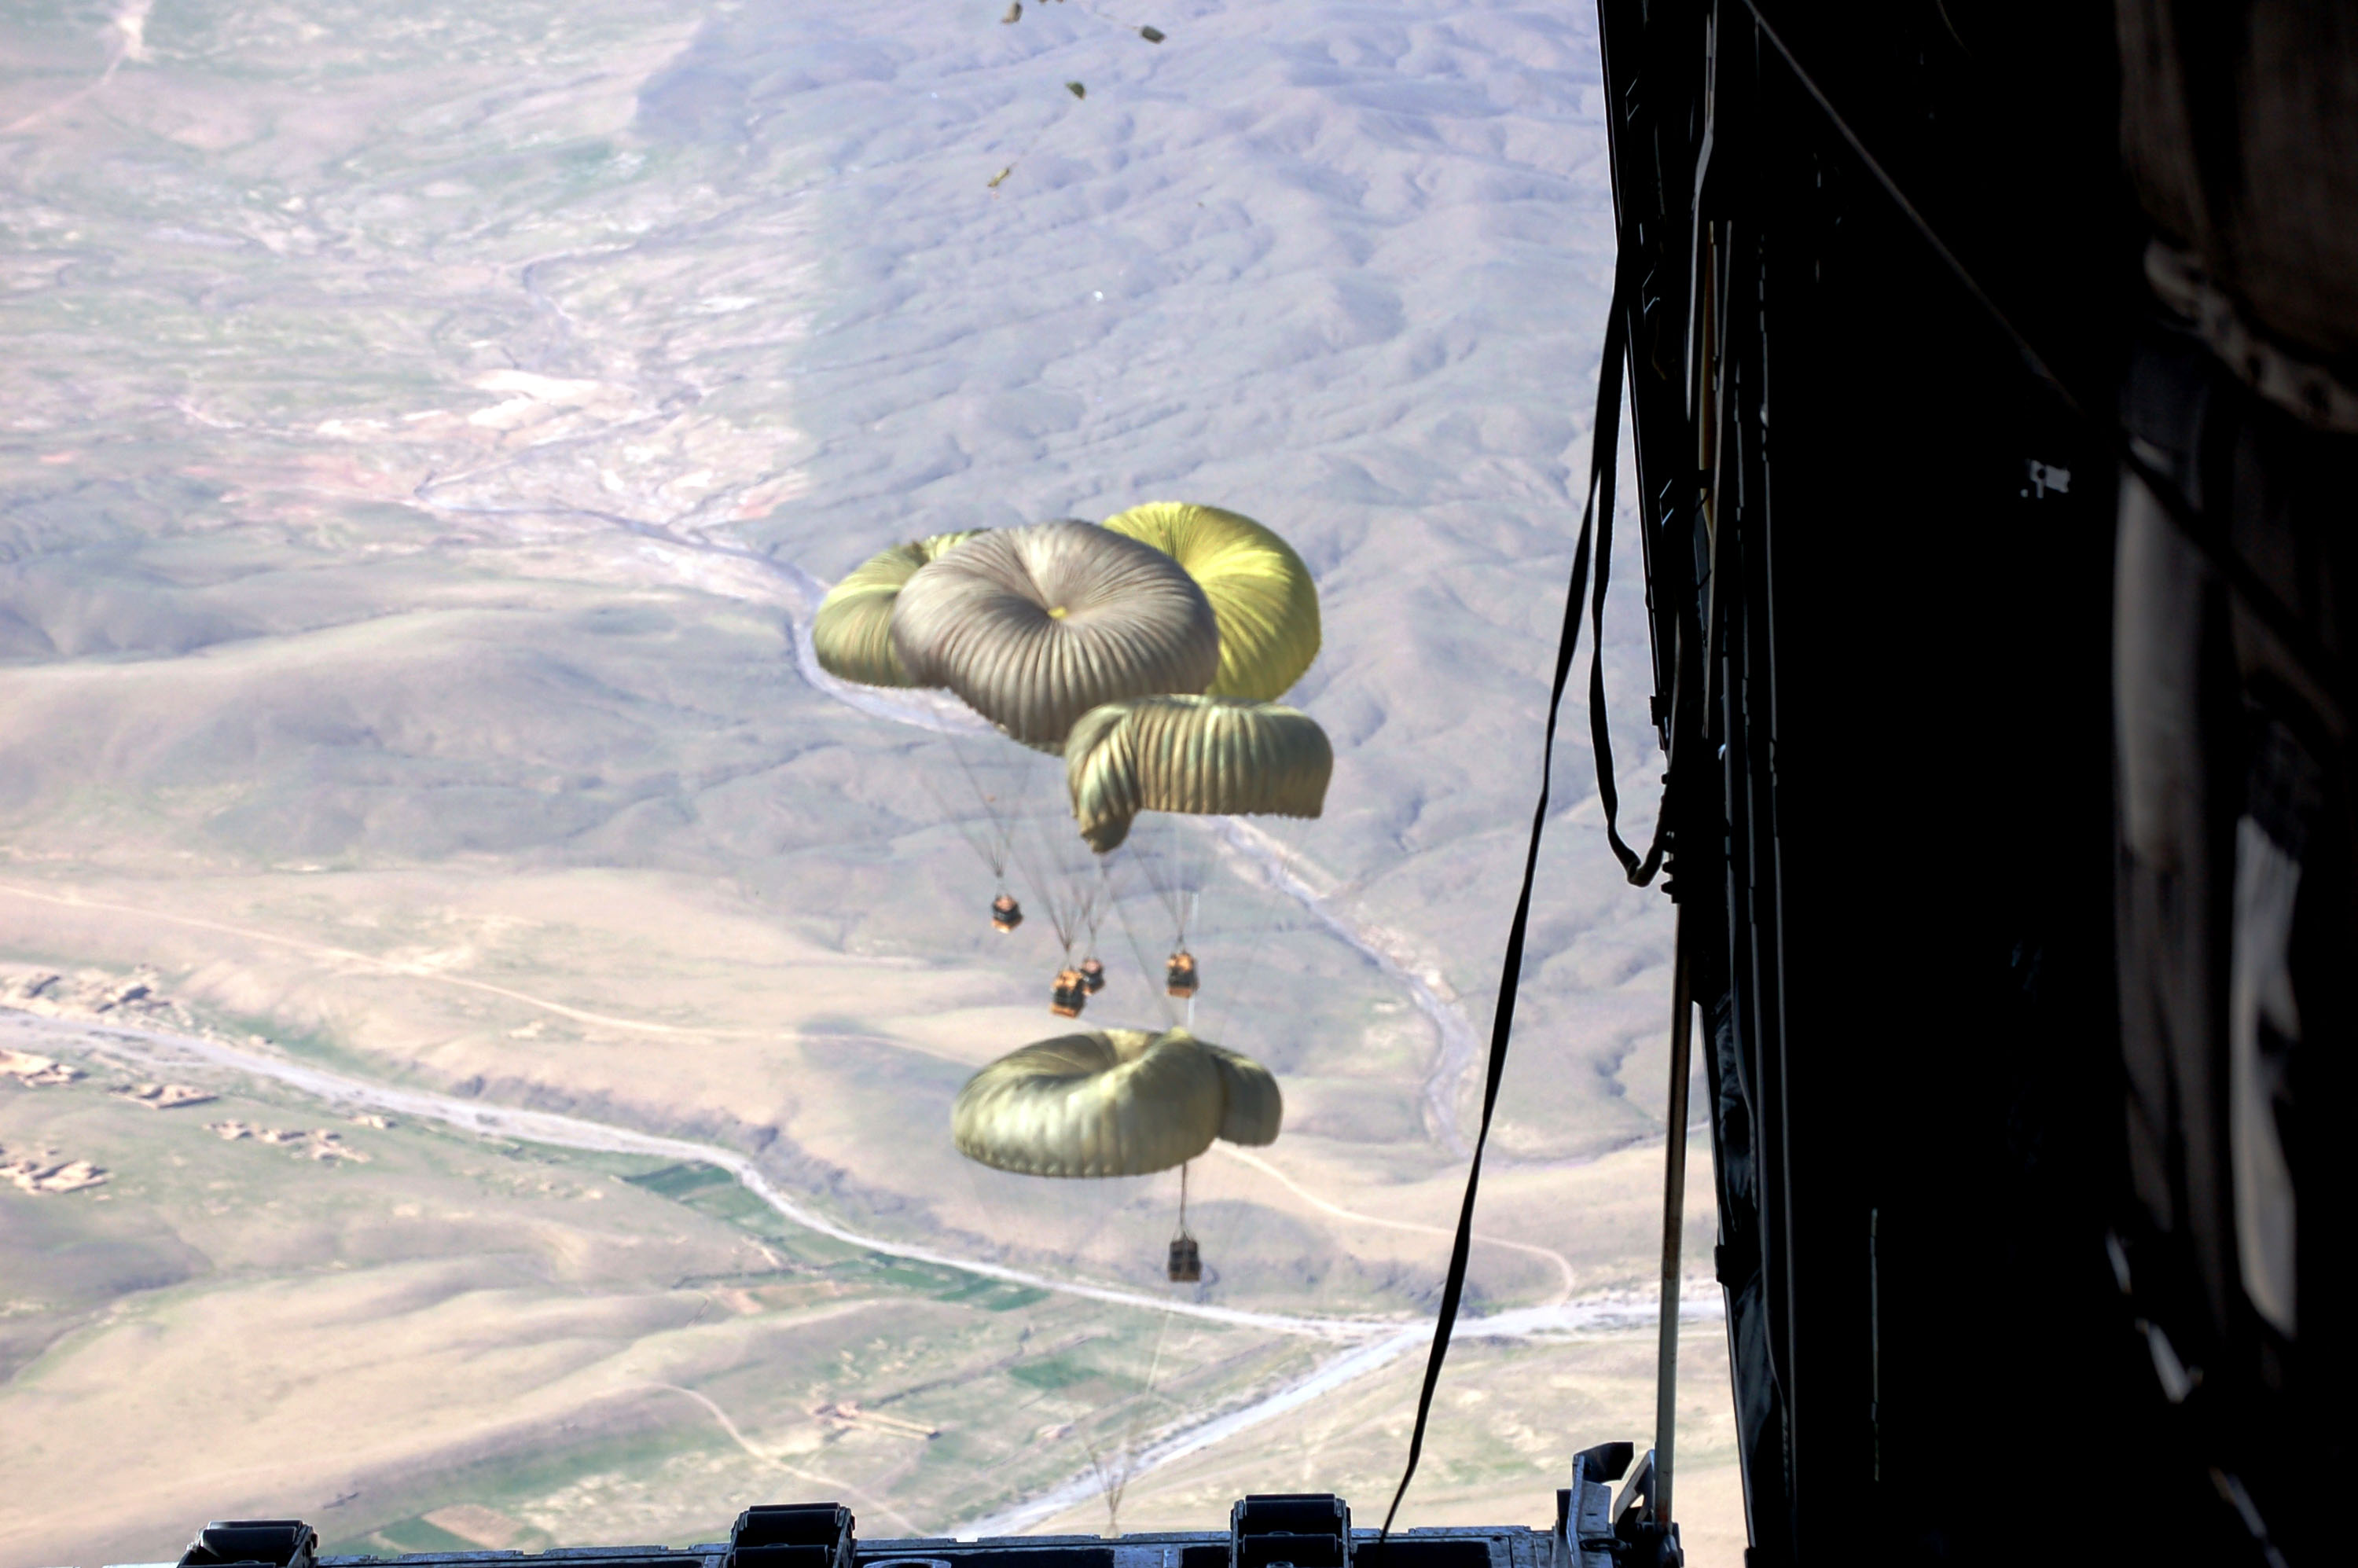 Emergency airdrop sustains combat ops in Afghanistan > Air Mobility